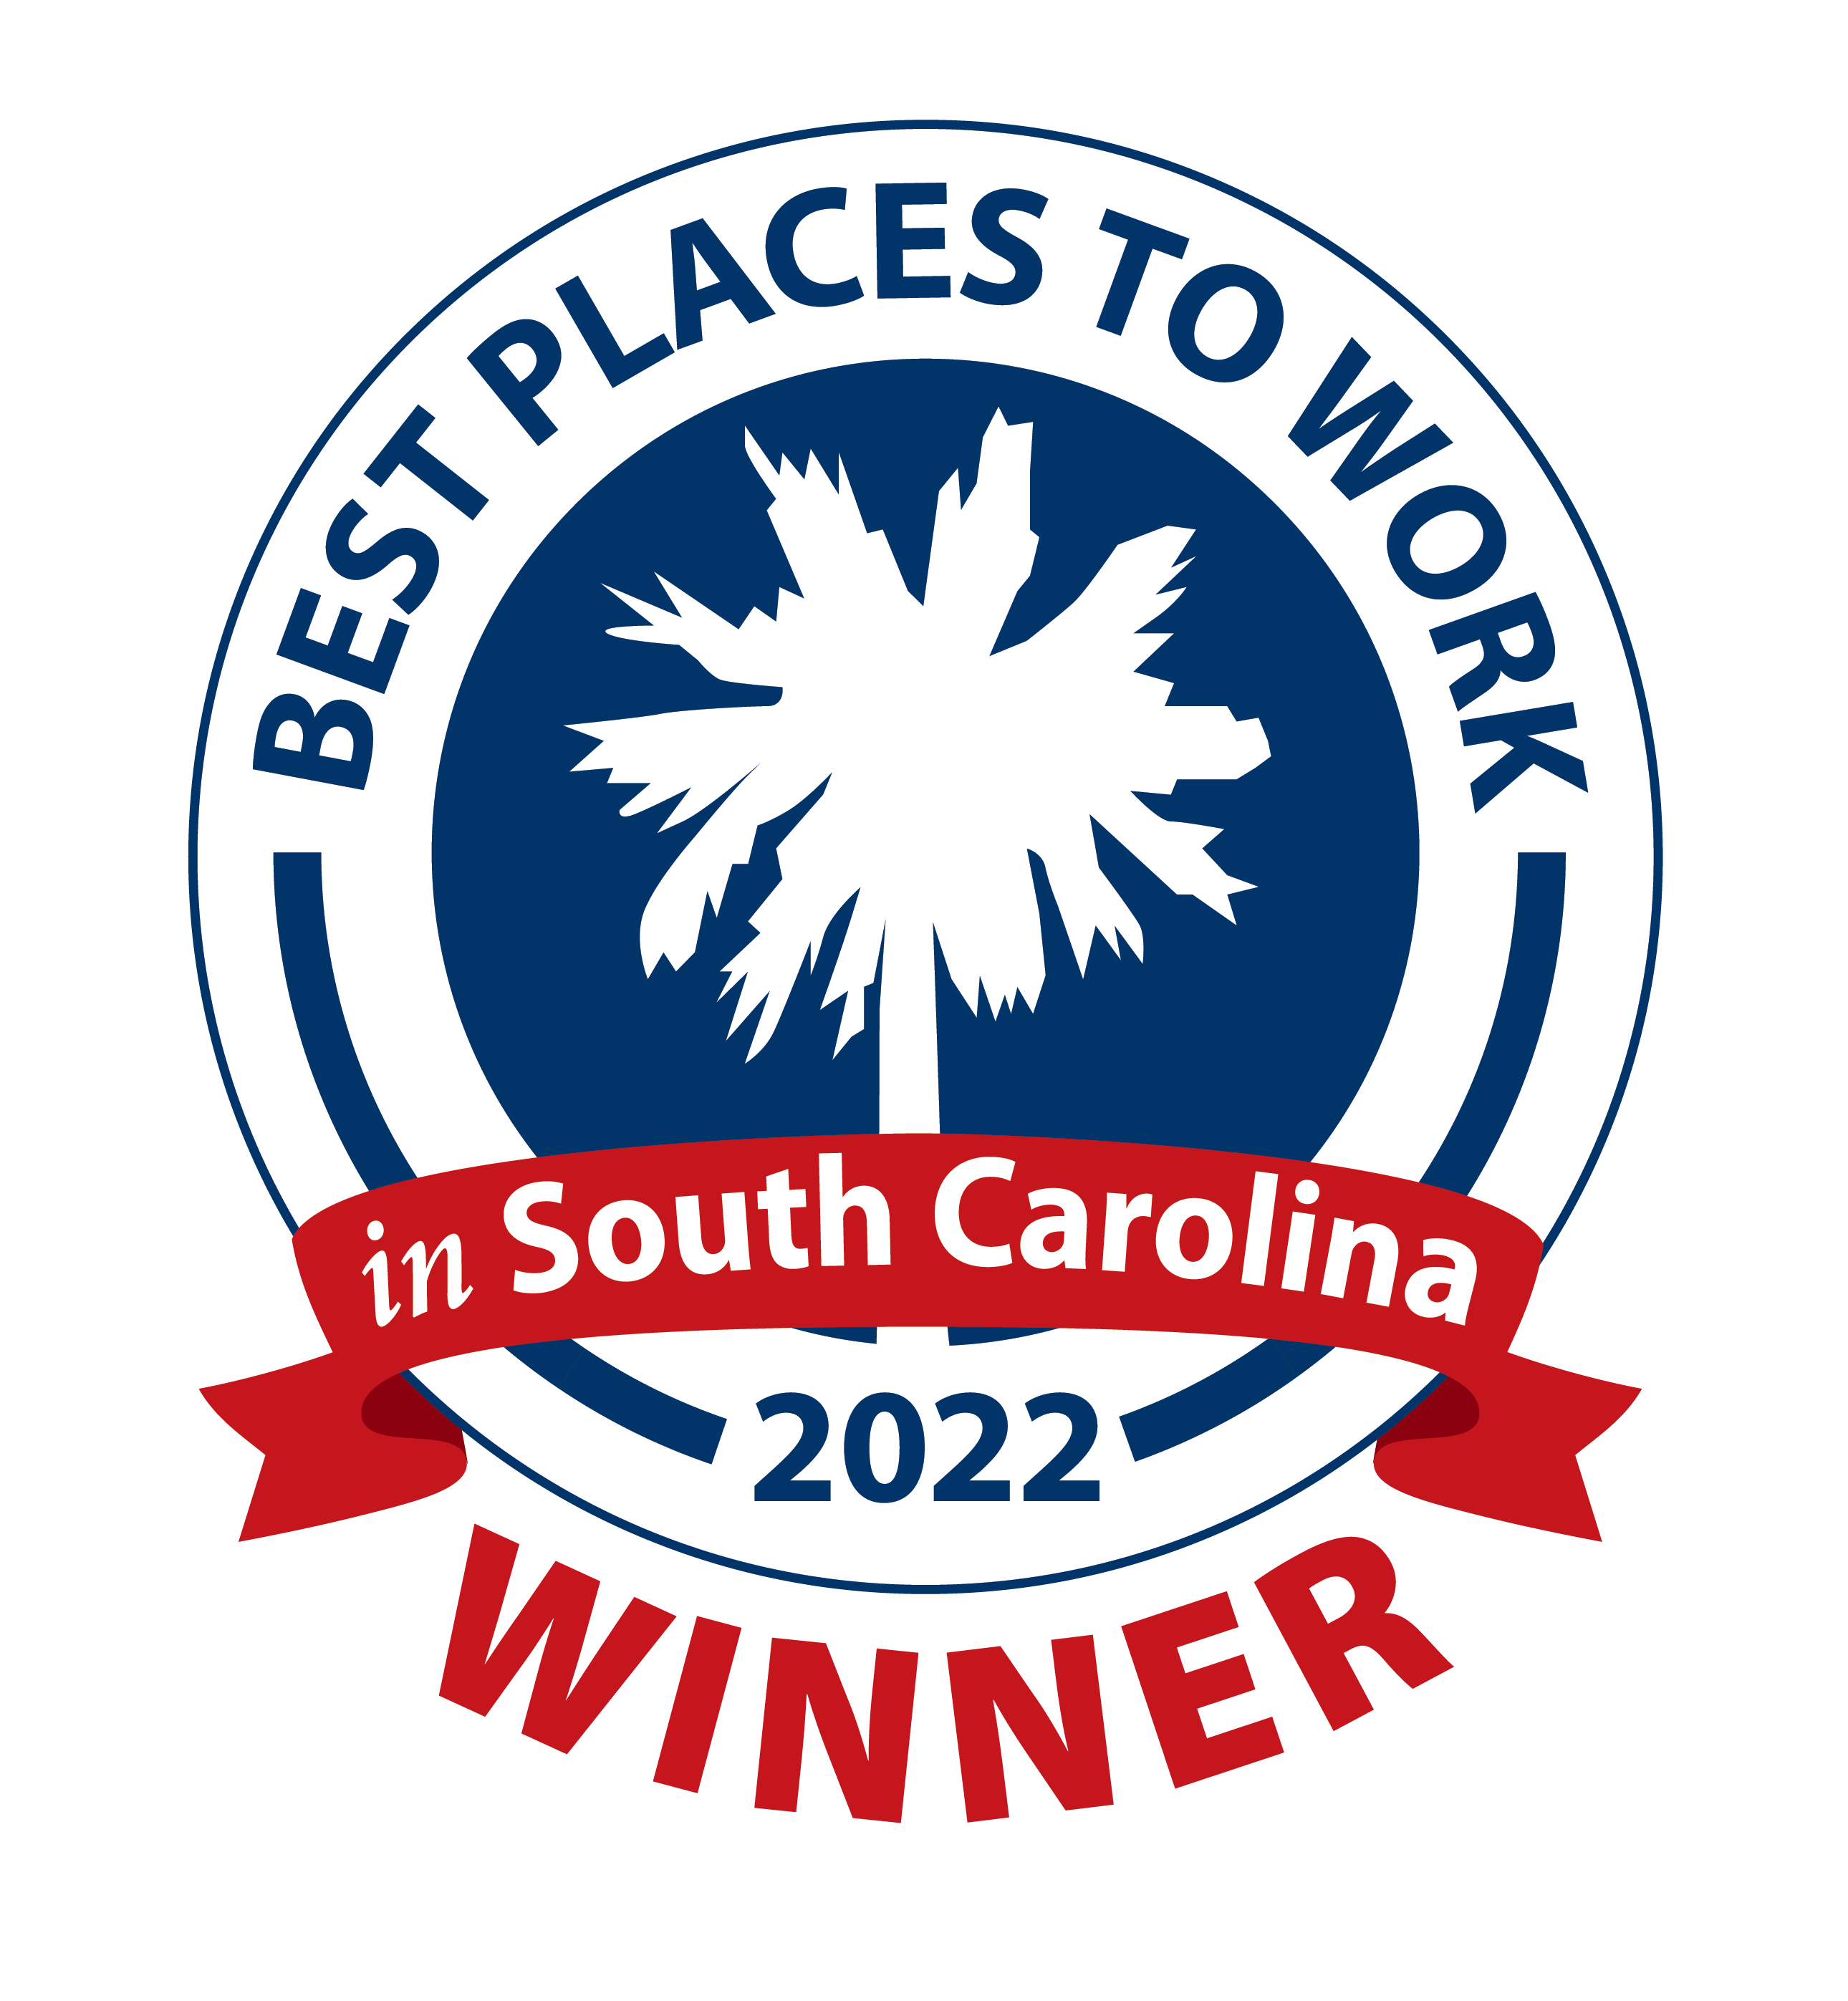 Best Places to Work Winner